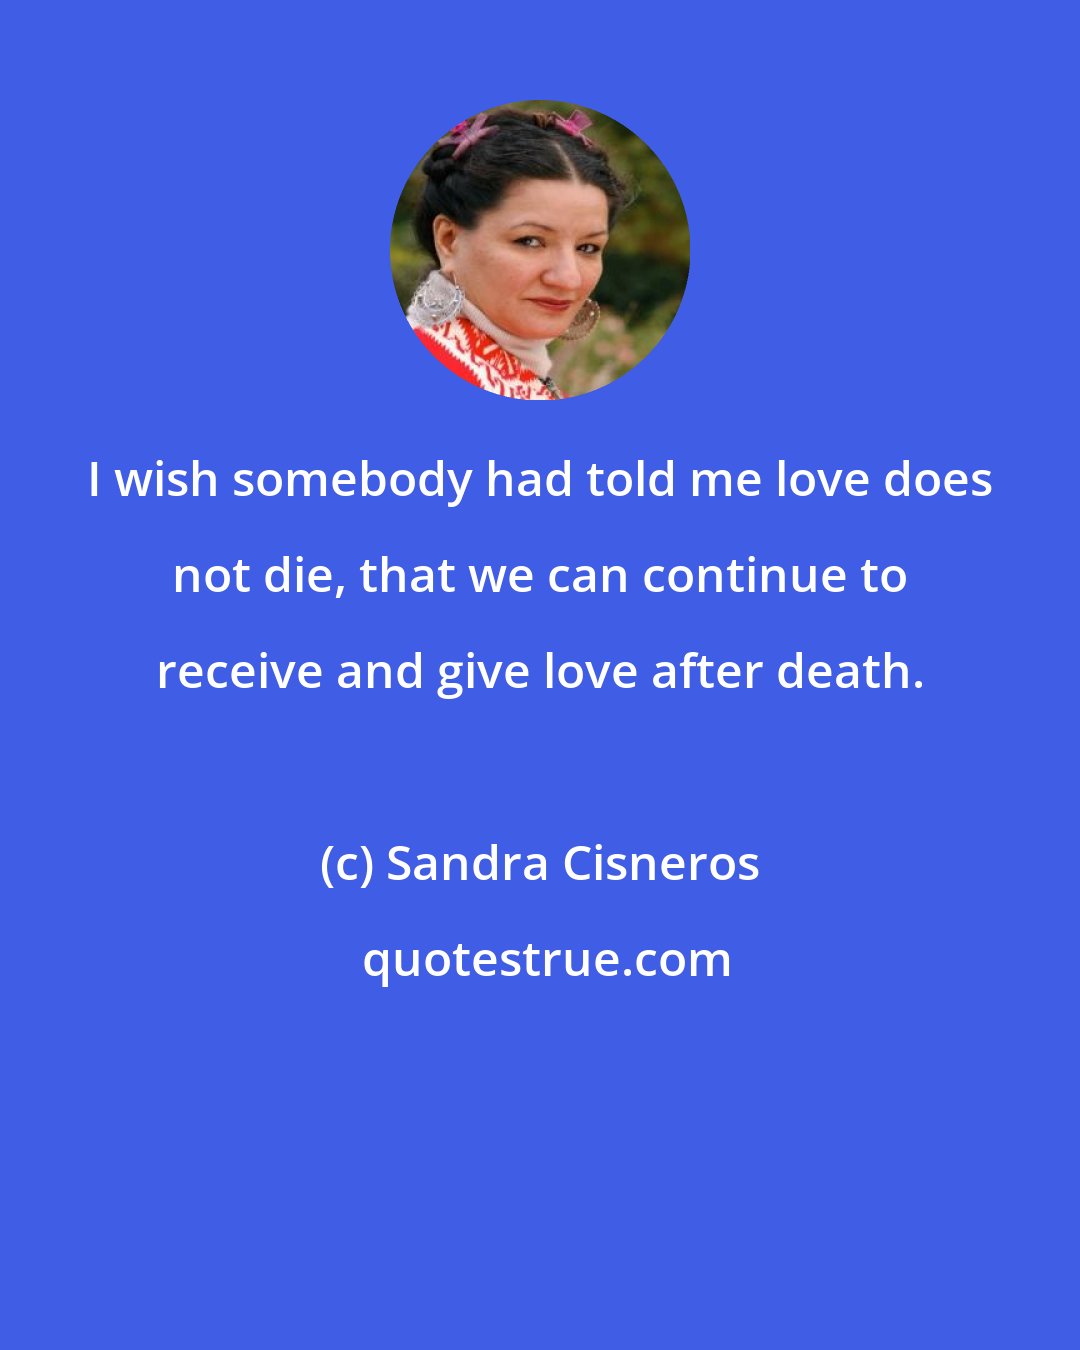 Sandra Cisneros: I wish somebody had told me love does not die, that we can continue to receive and give love after death.